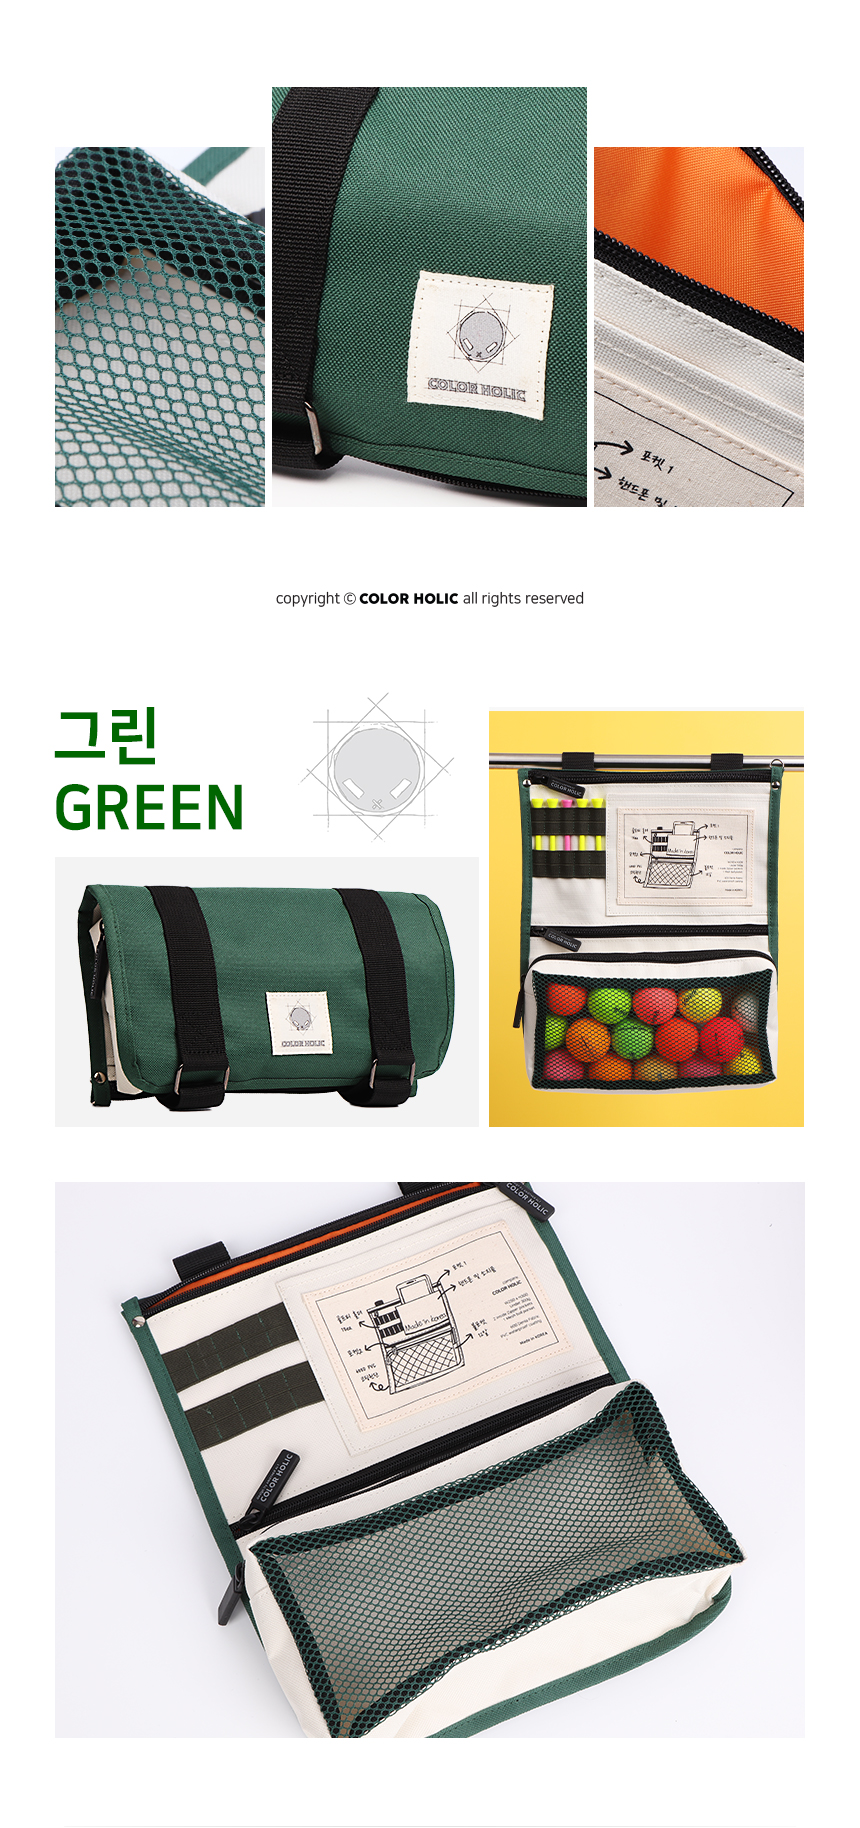 colorholic_golfcart_organizer_pouch_rok_09_page_title_story_box.jpg